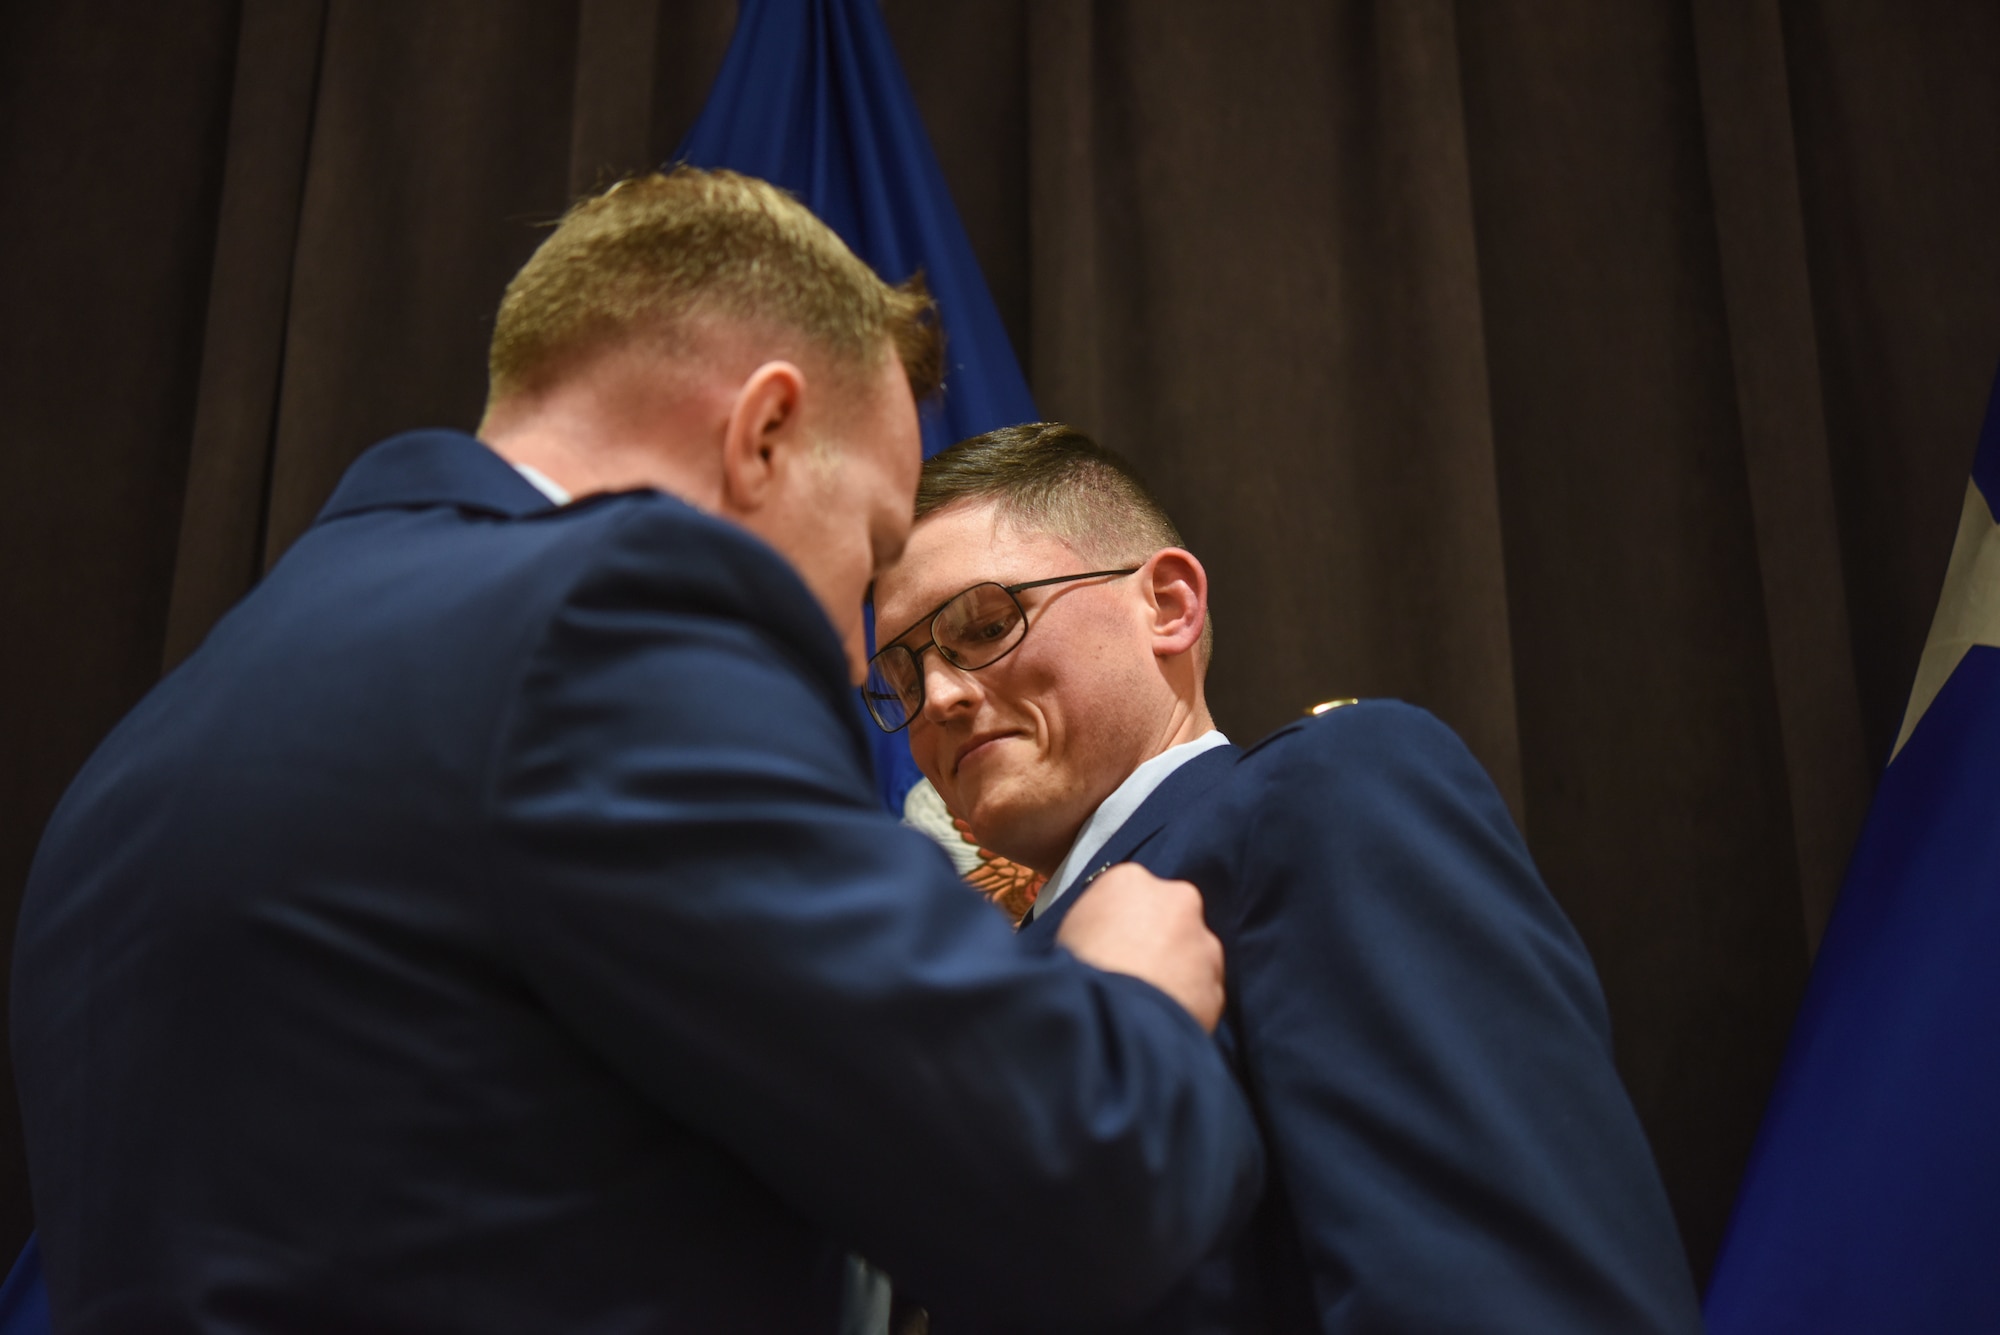 Second Lt. Micah Daniel receives his pilot’s wings during a dual commissioning and “winging” ceremony Dec. 19, 2019, at Maxwell Air Force Base, Alabama. Daniel earned his wings at Pilot Training Next version 2 before Officer Training School and commissioning – basically working backwards to become a pilot. (U.S. Air Force photo by Staff Sgt. Quay Drawdy)